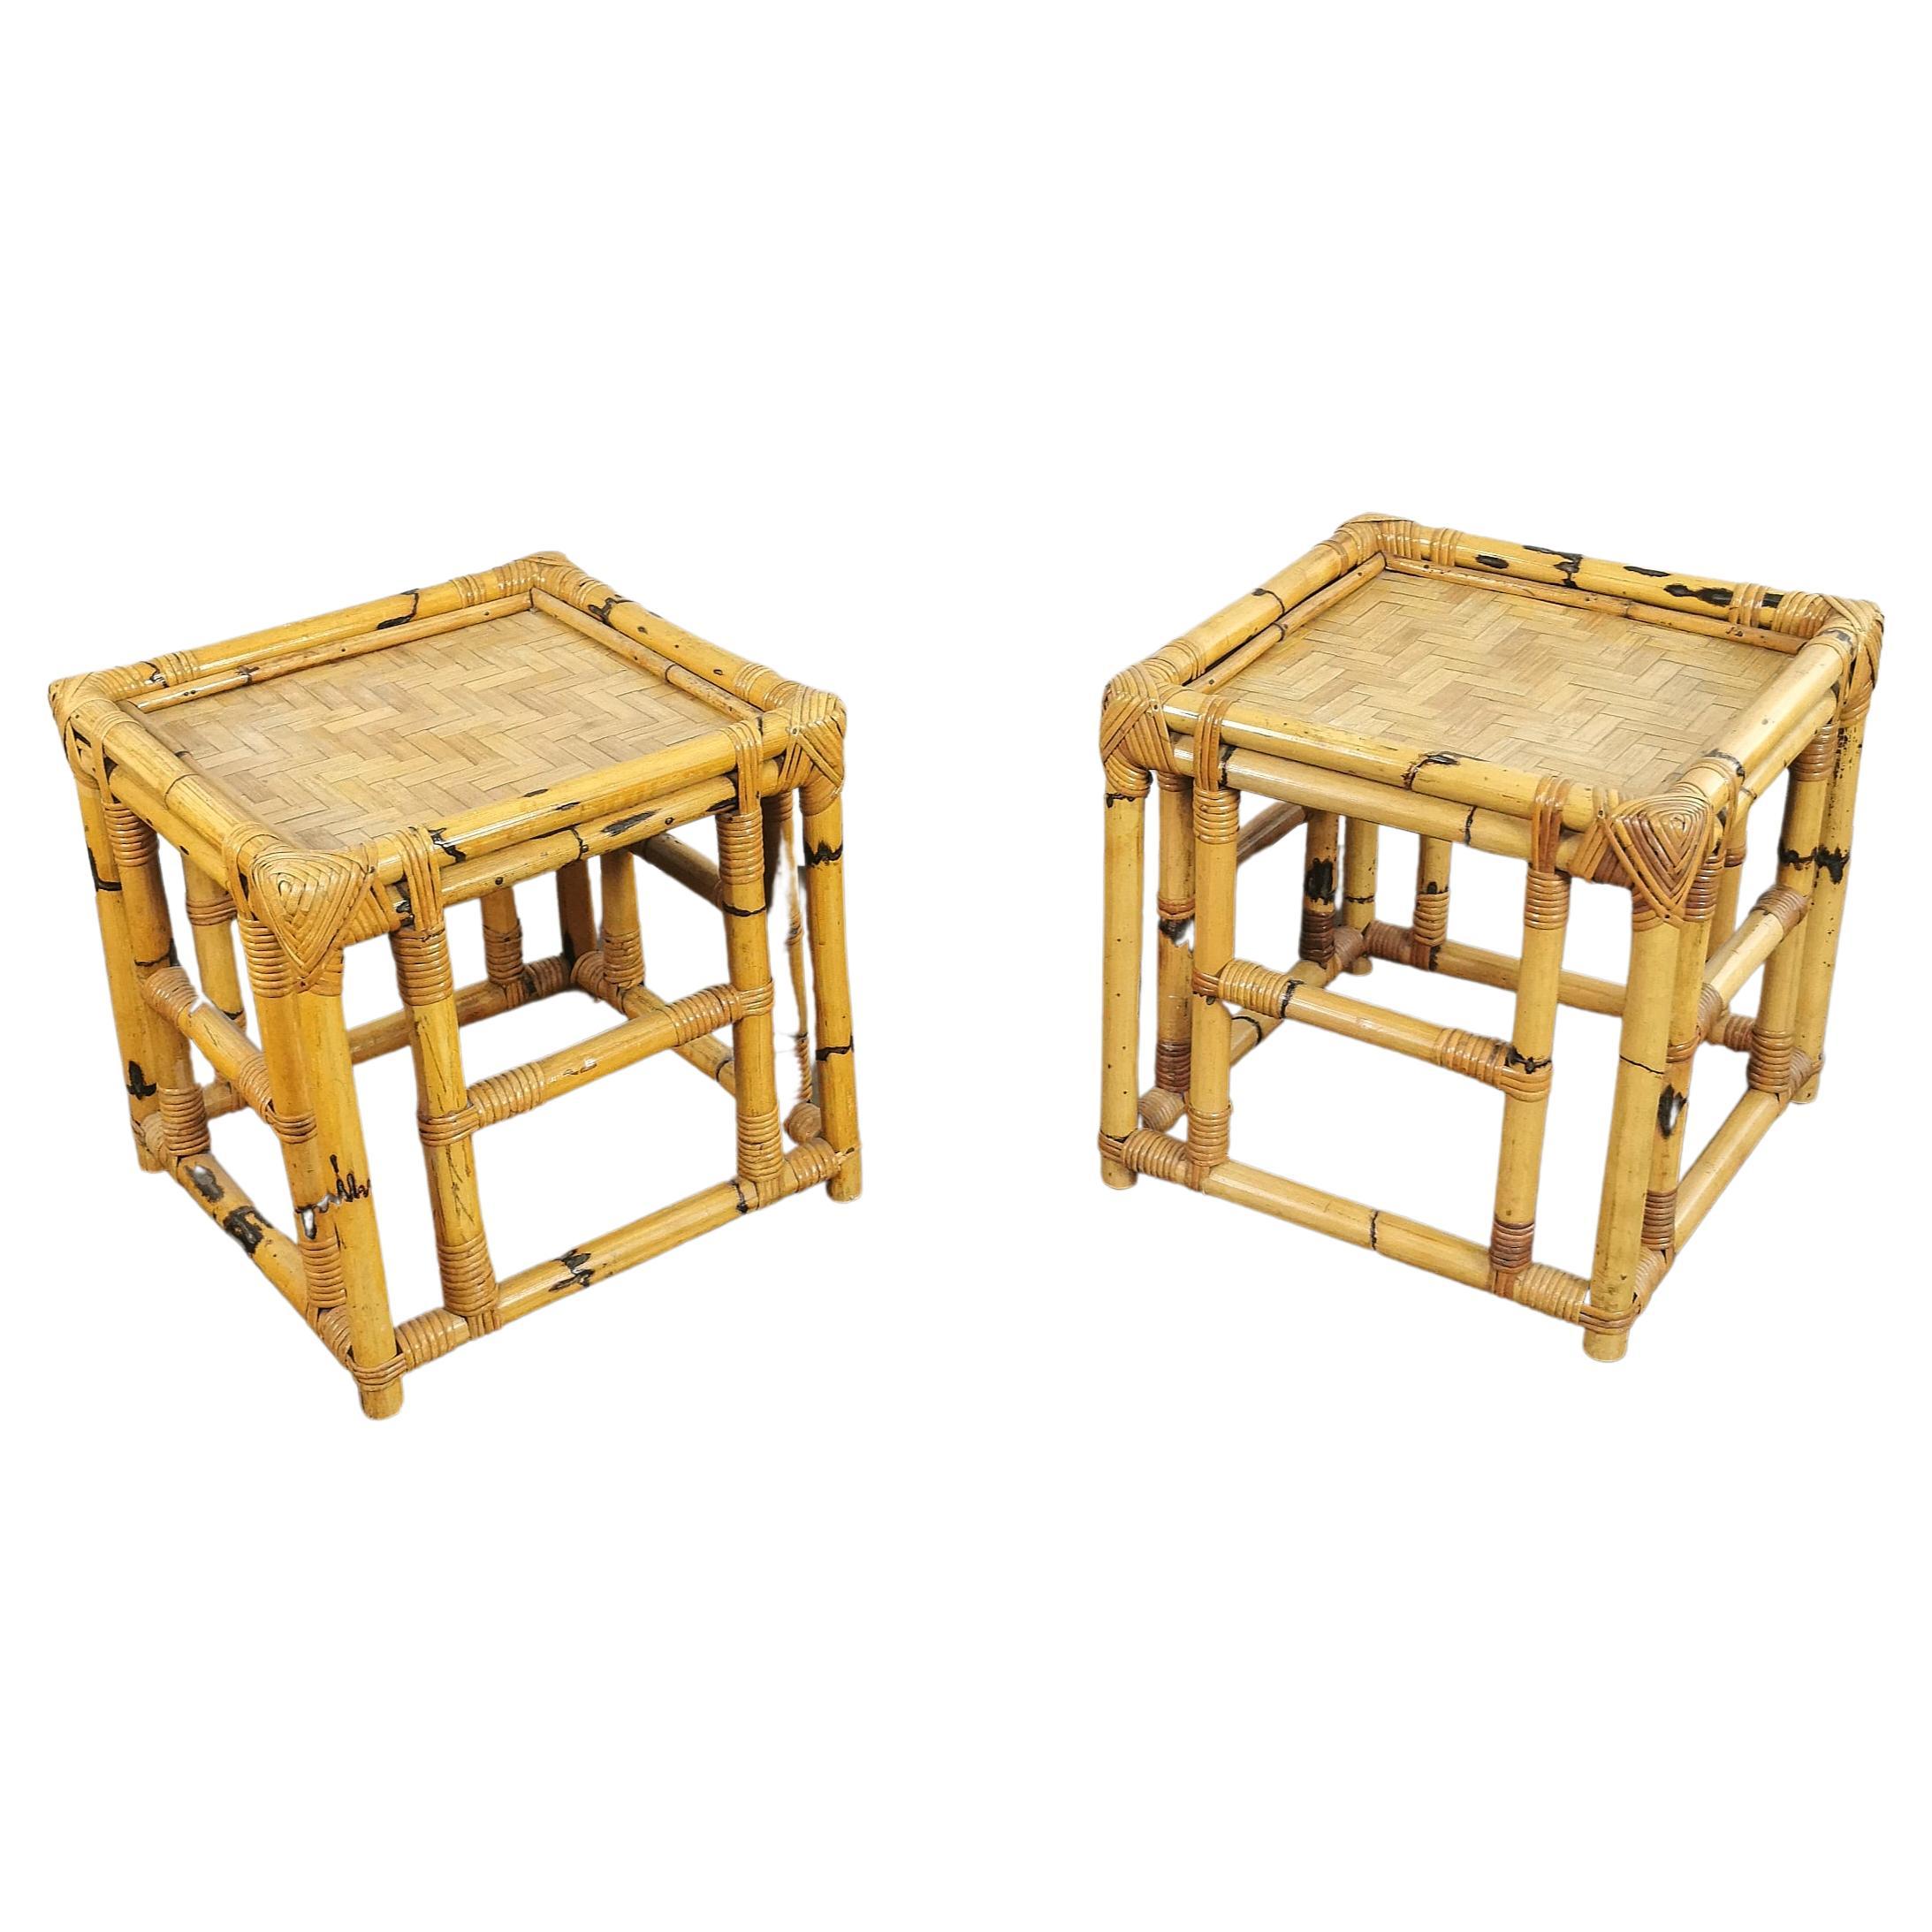 Pair of Coffee Tables Bamboo Cubic Vivai del Sud Midcentury Modern Italy 1970s  For Sale